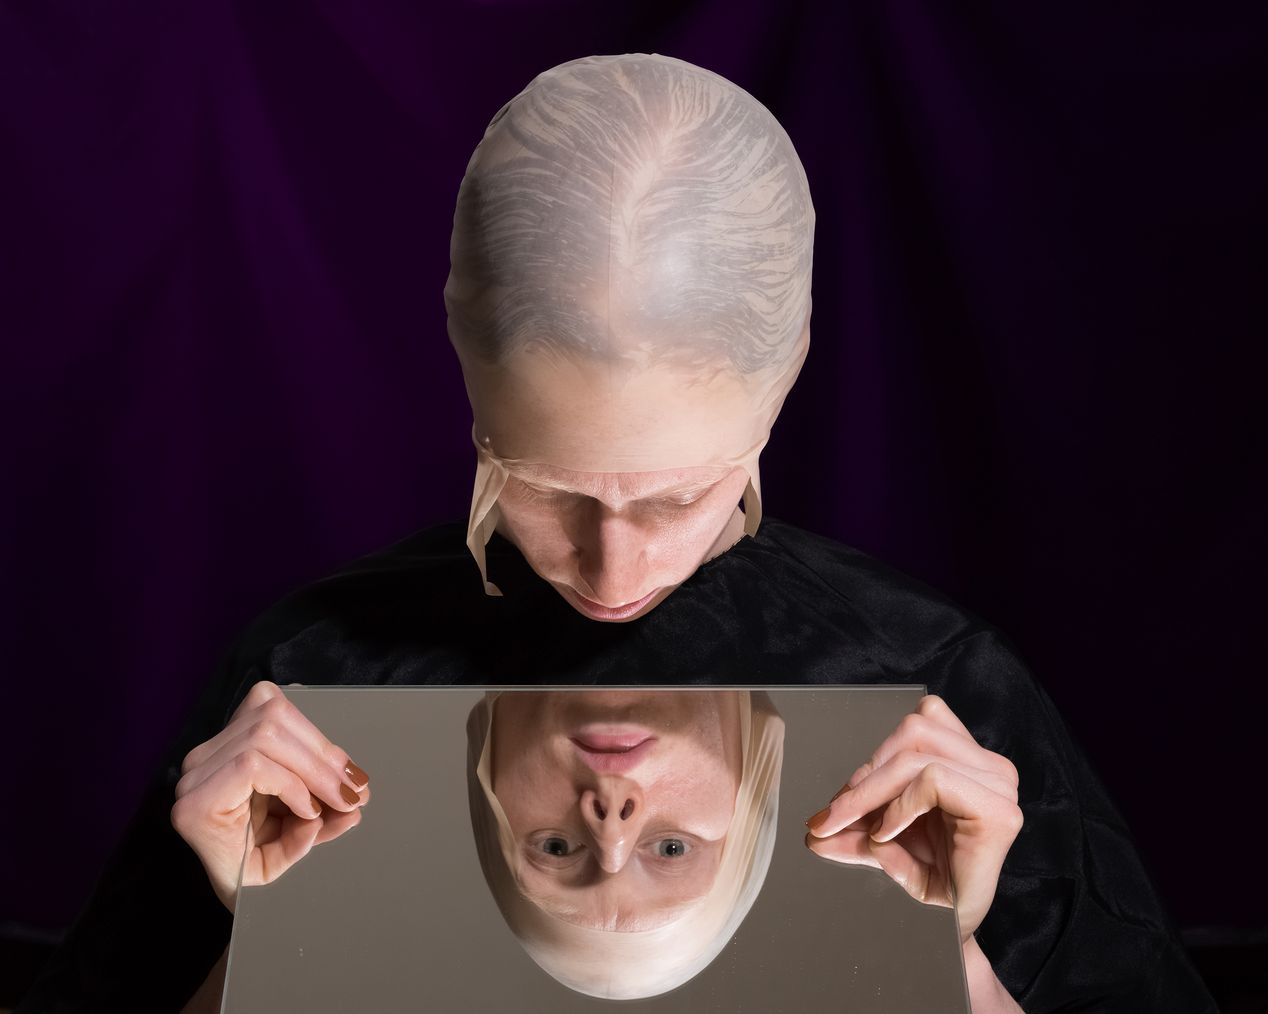 A woman in a bald cap looking at her mirror reflection, art photography, Ilona Szwarc, contemporary Los Angeles artist.